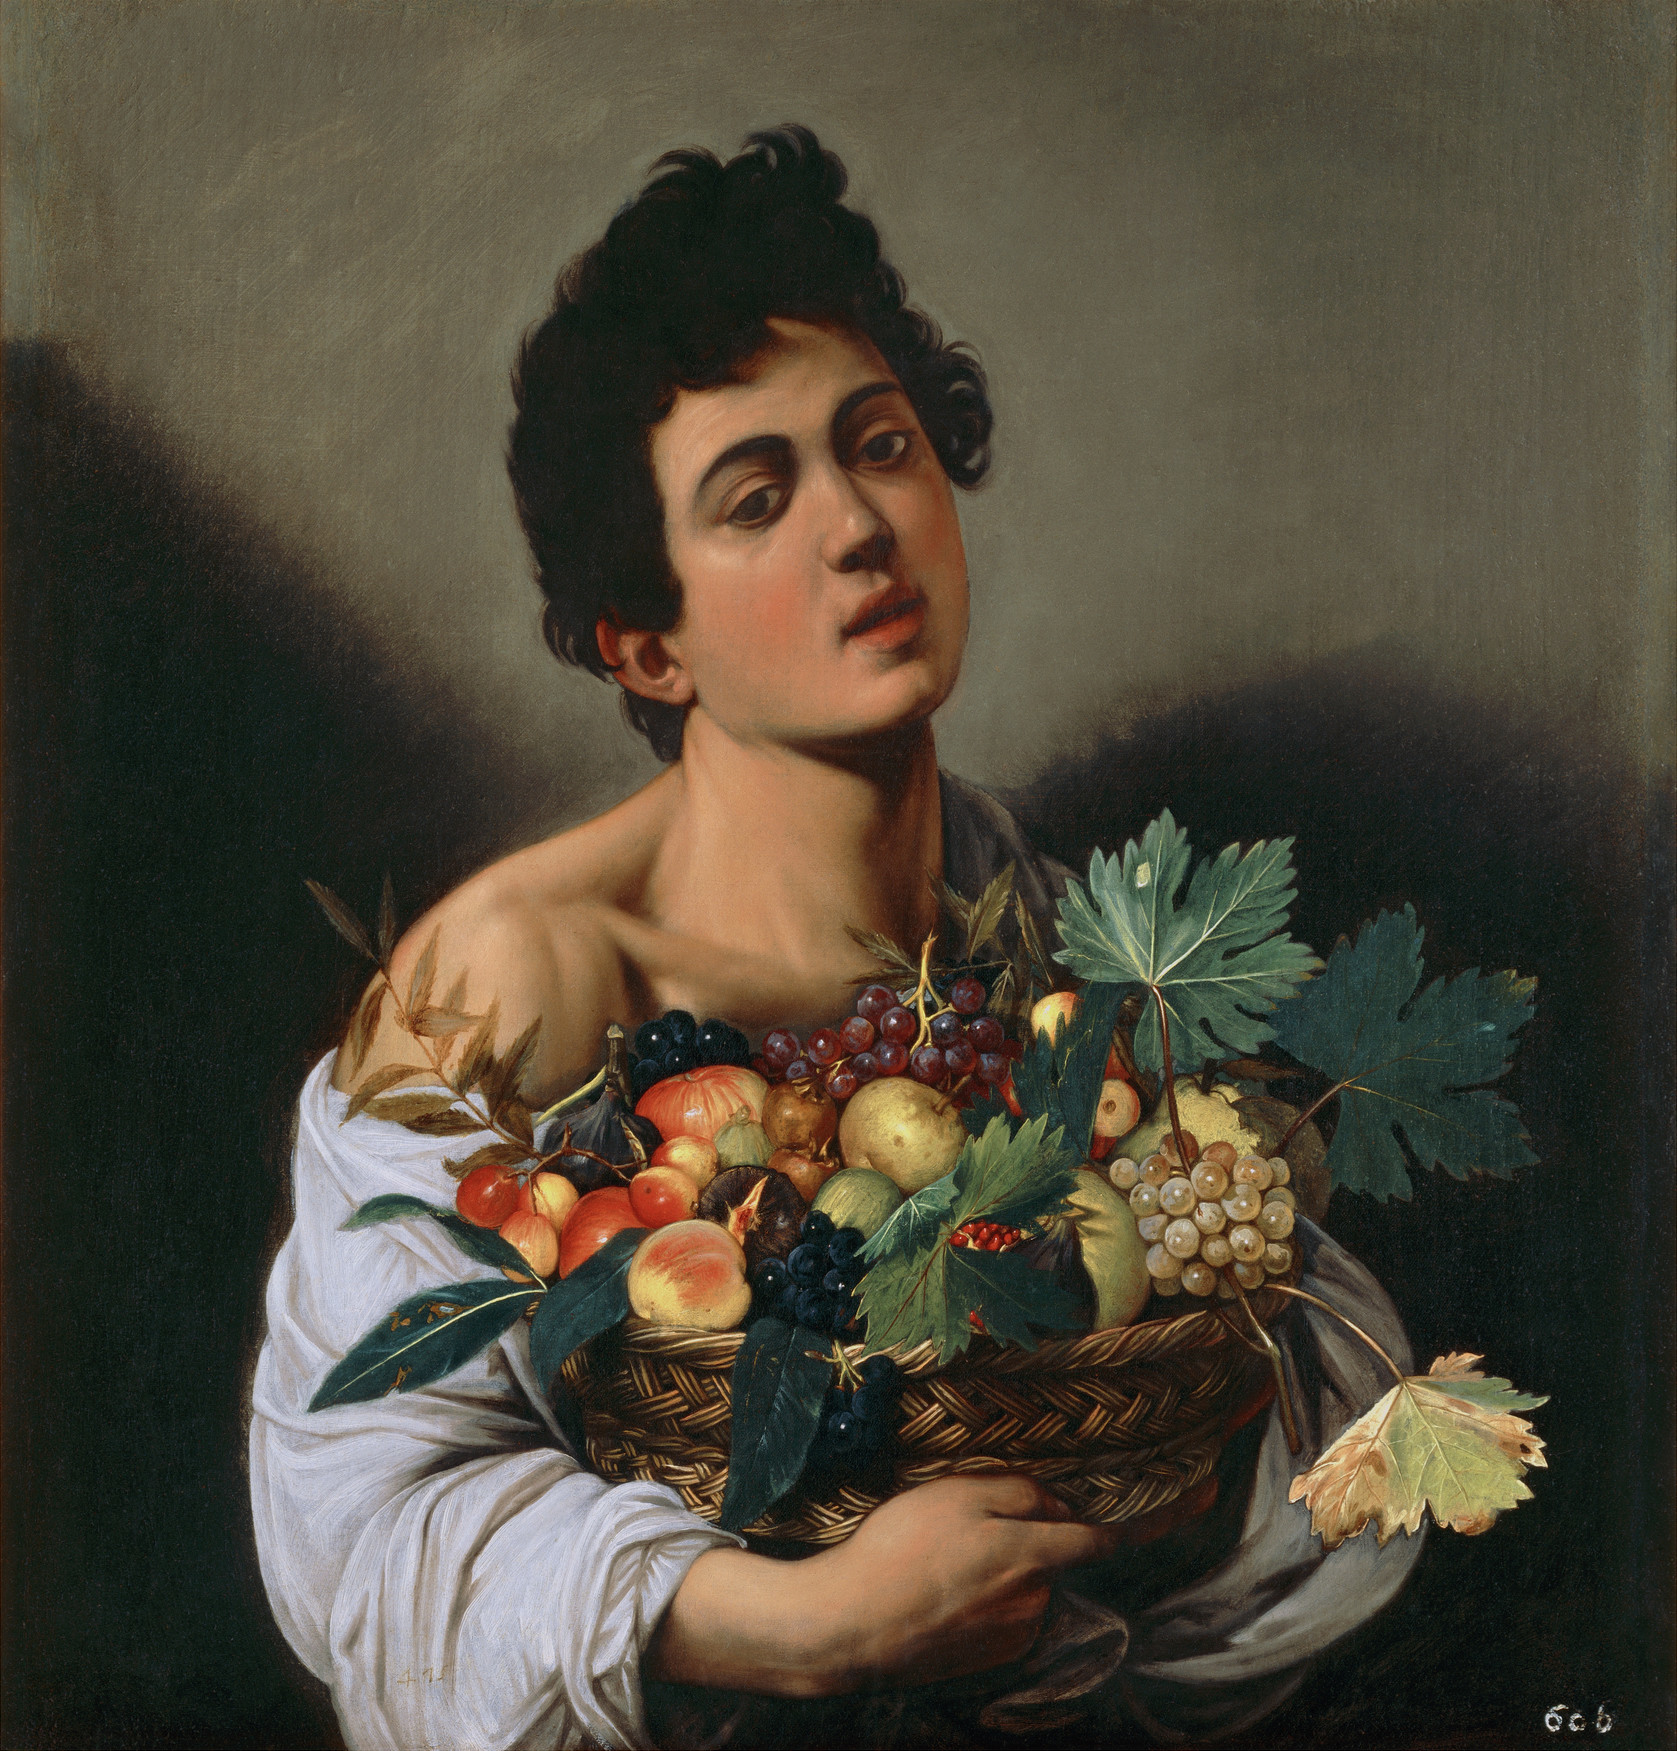 Boy with a Basket of Fruit, about 1593-94. Caravaggio (Italian, 1571-1610). Oil on canvas. Minister